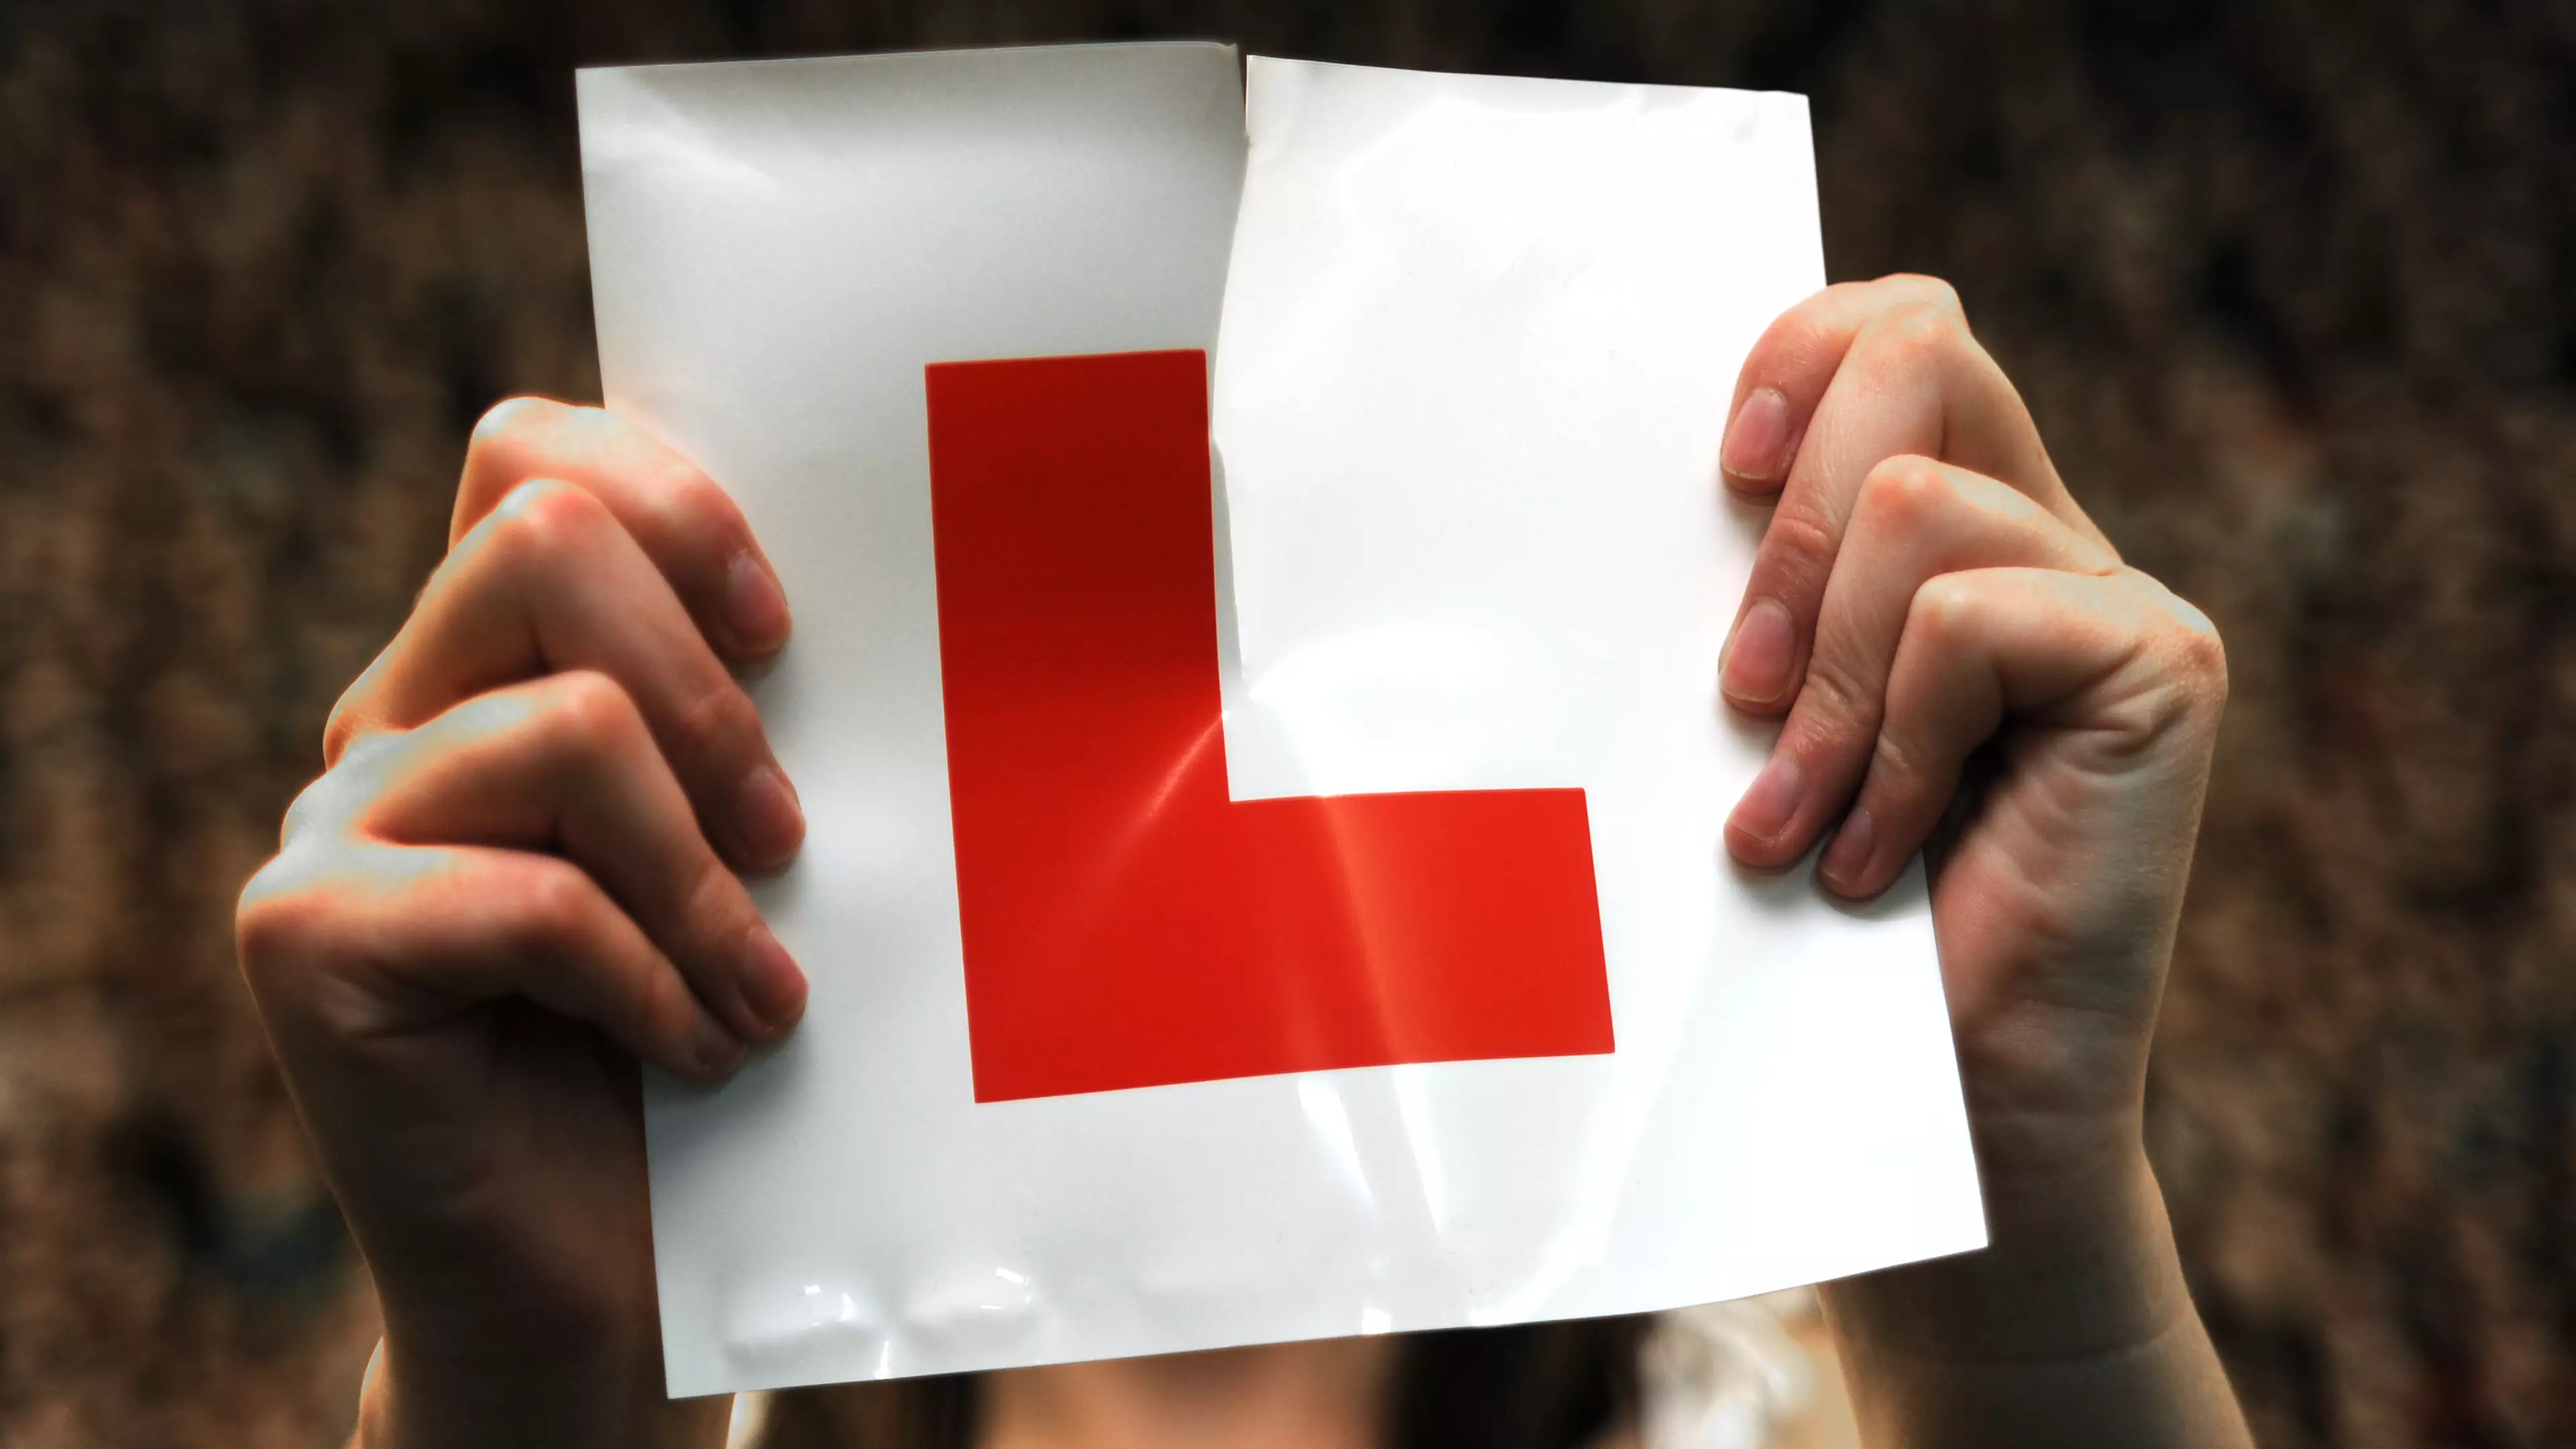 Woman Runs Over And Kills Driving Instructor While Taking Test In Poland